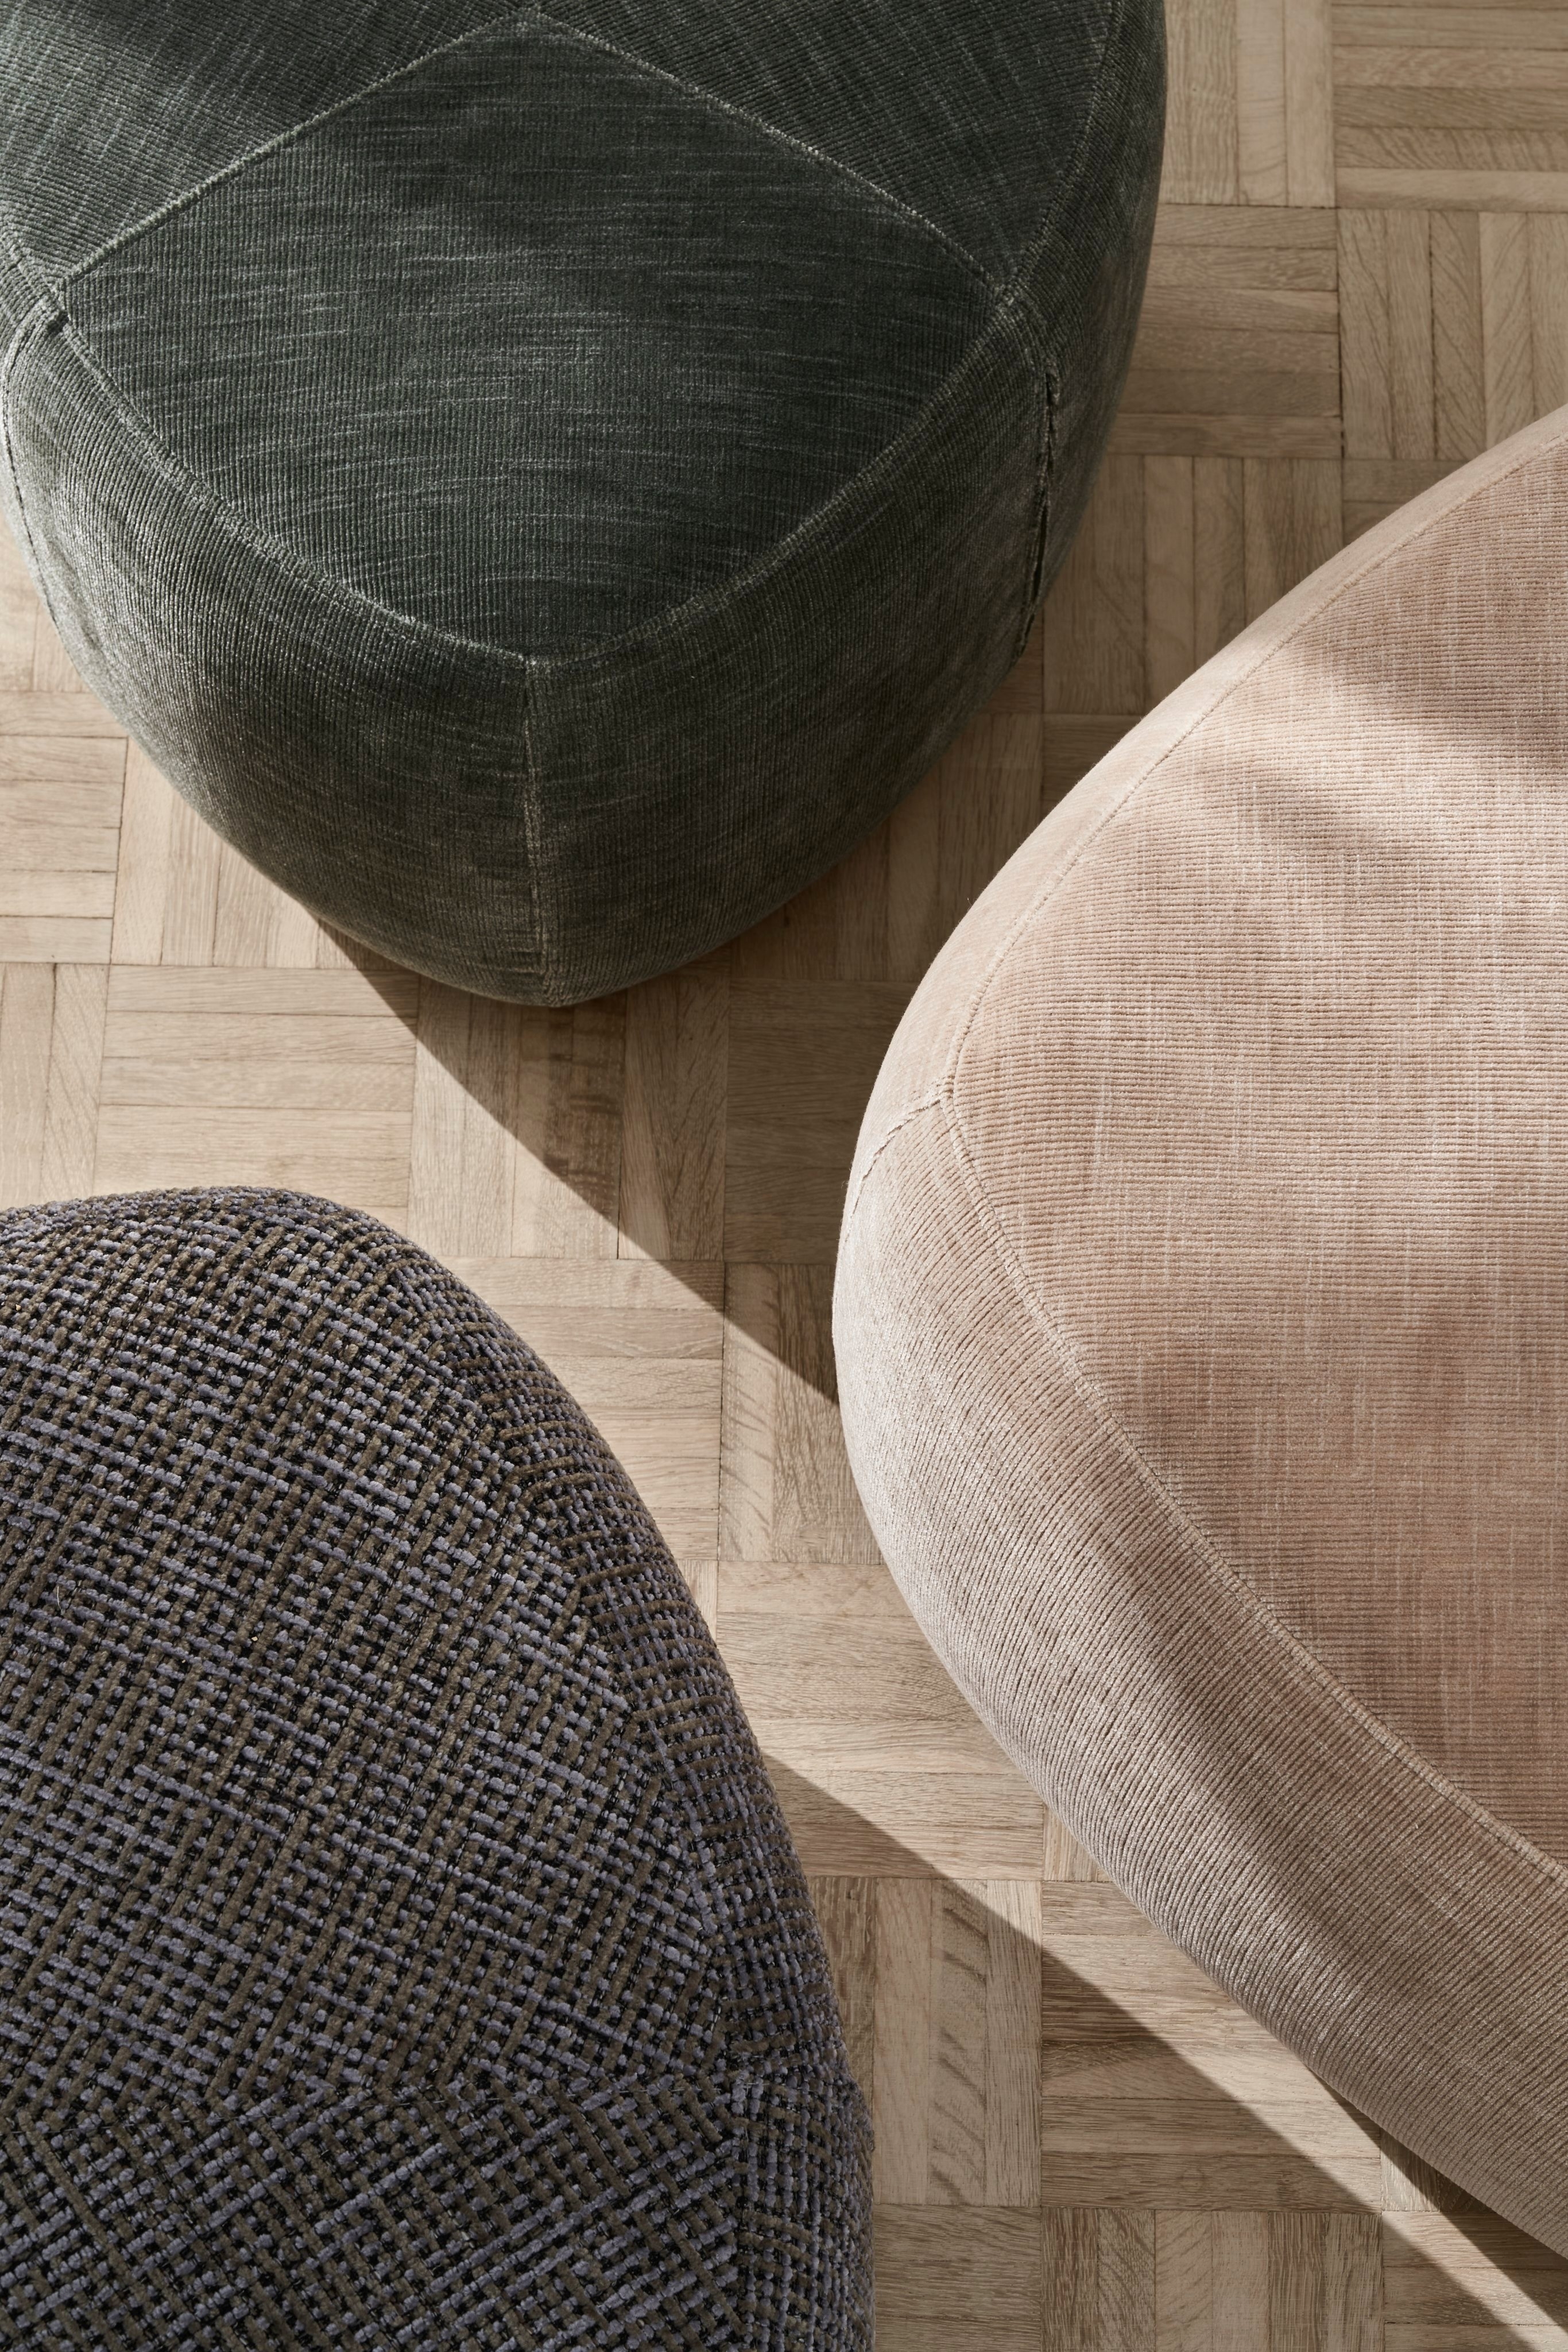 Textured bouclé fabric draped over an object with a soft, plush appearance